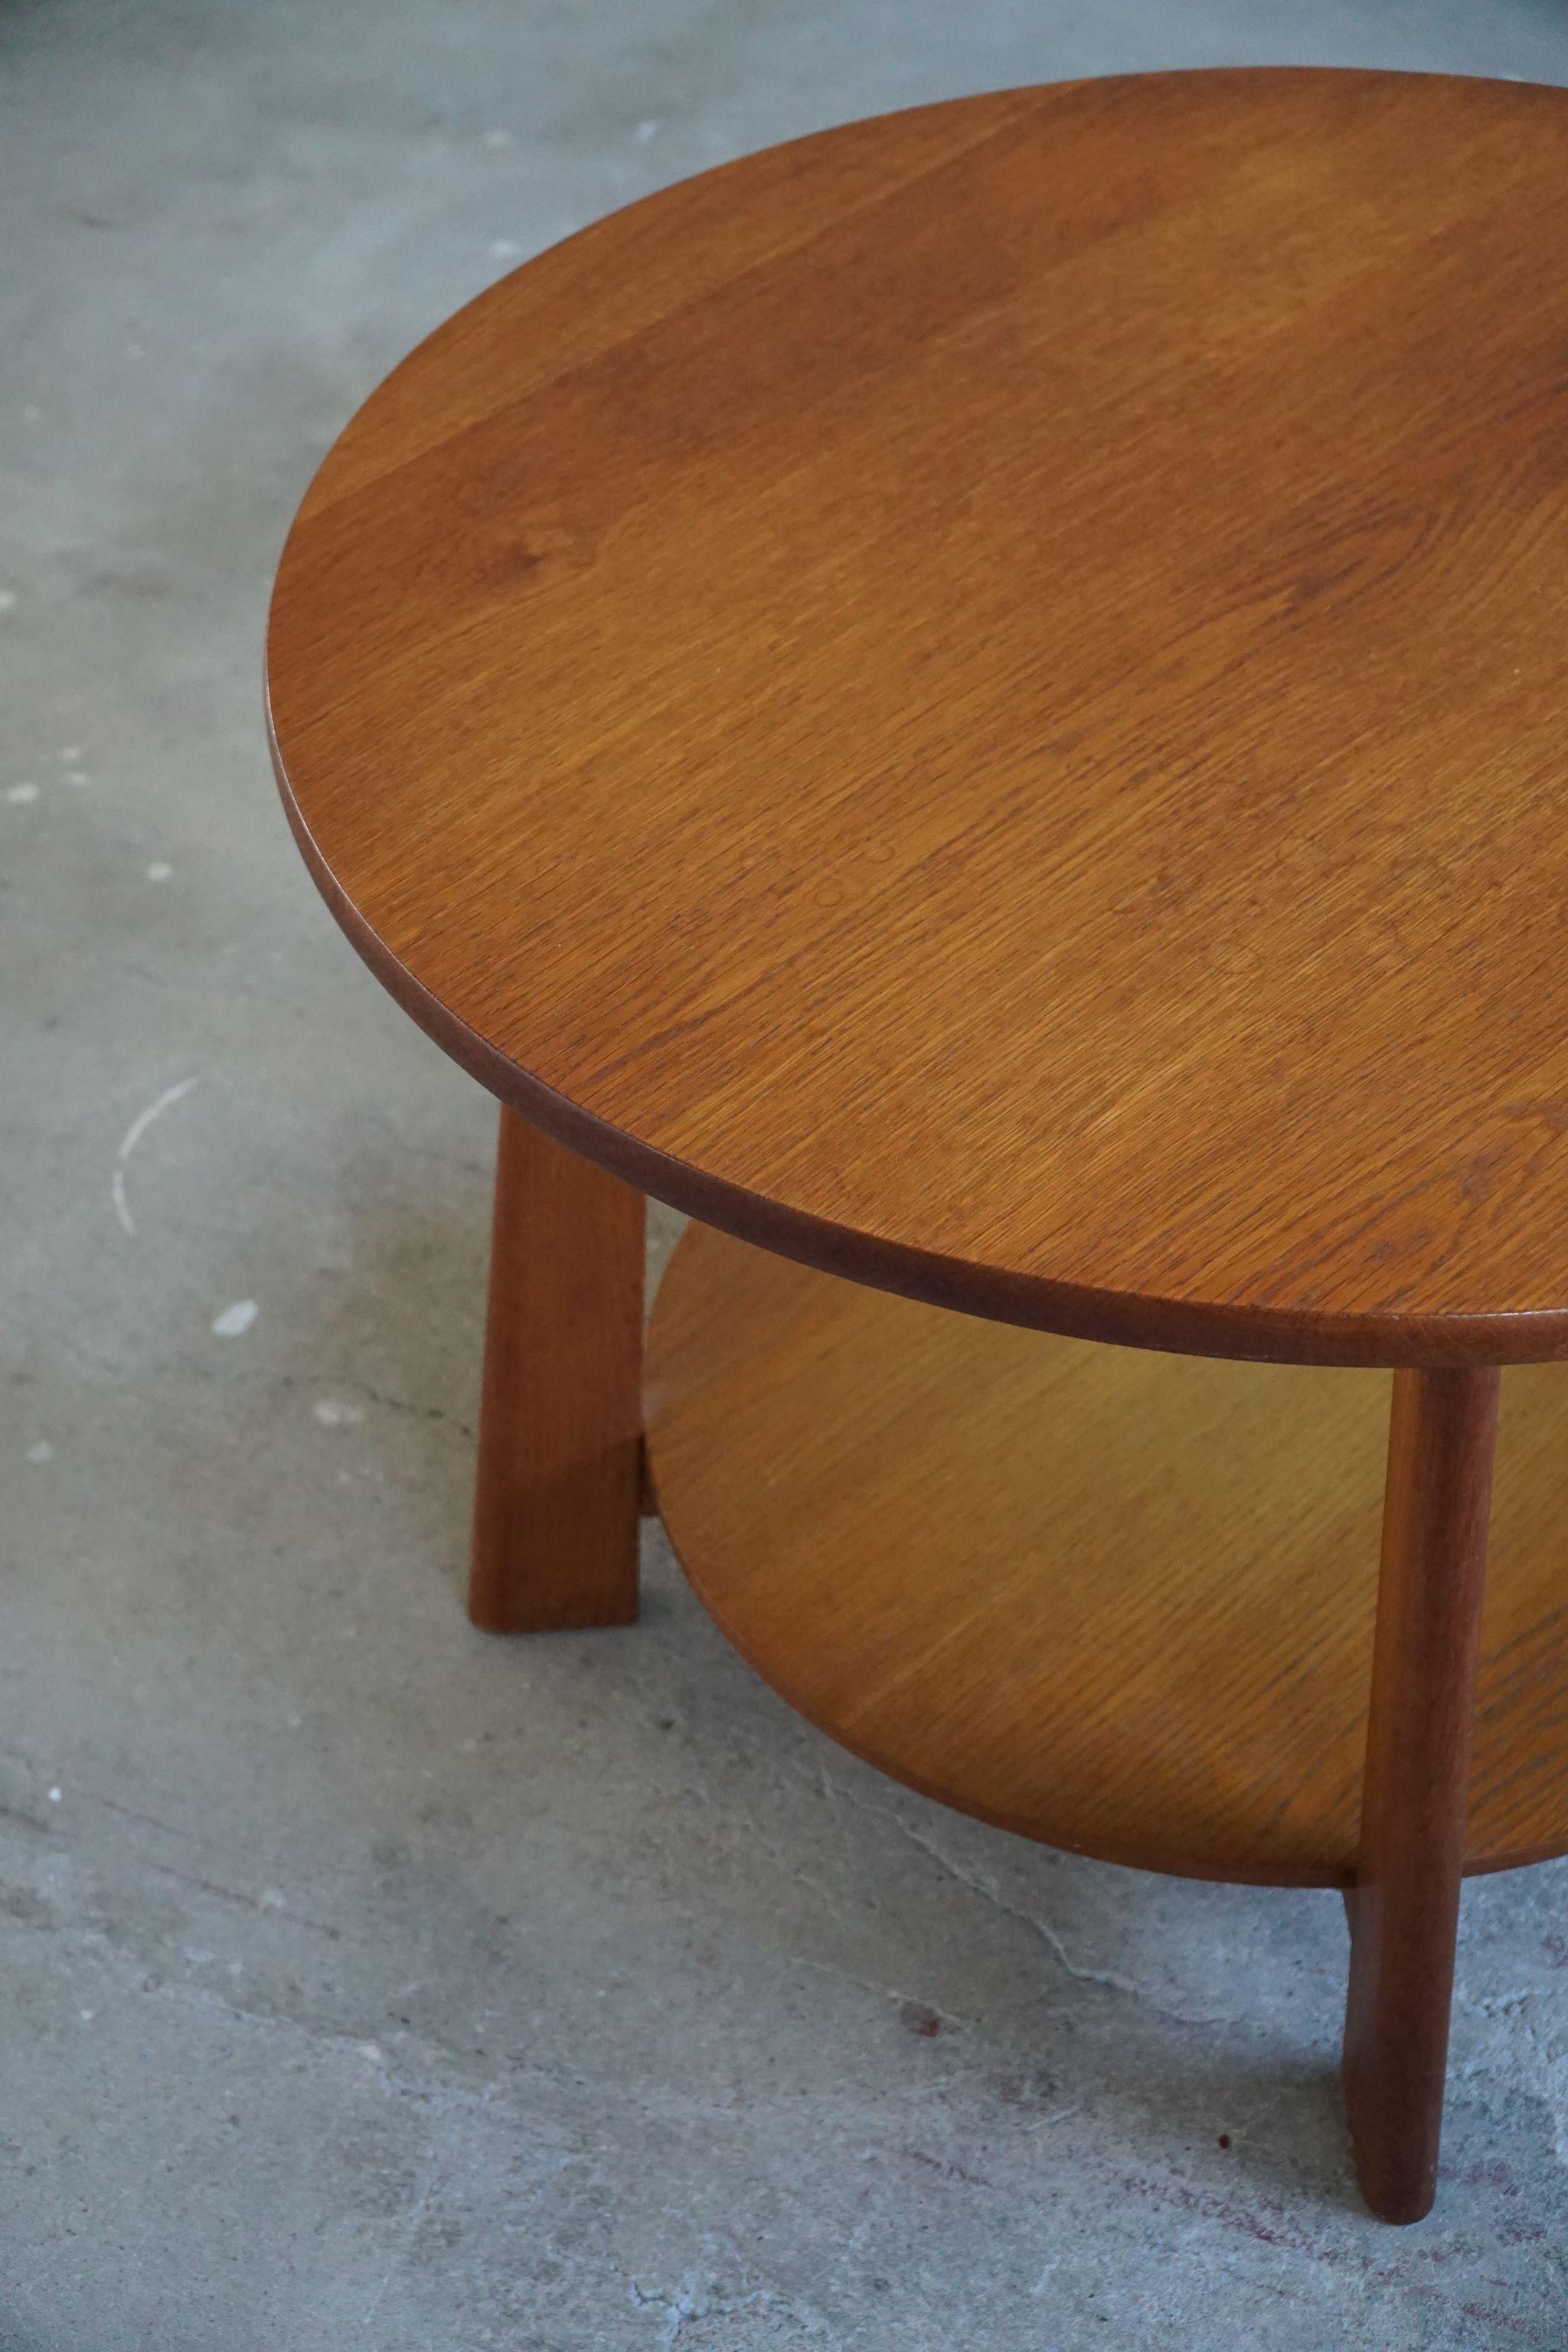 20th Century Otto Færge, Classic Round Side Table in Oak, Danish Modern, Made in 1940s